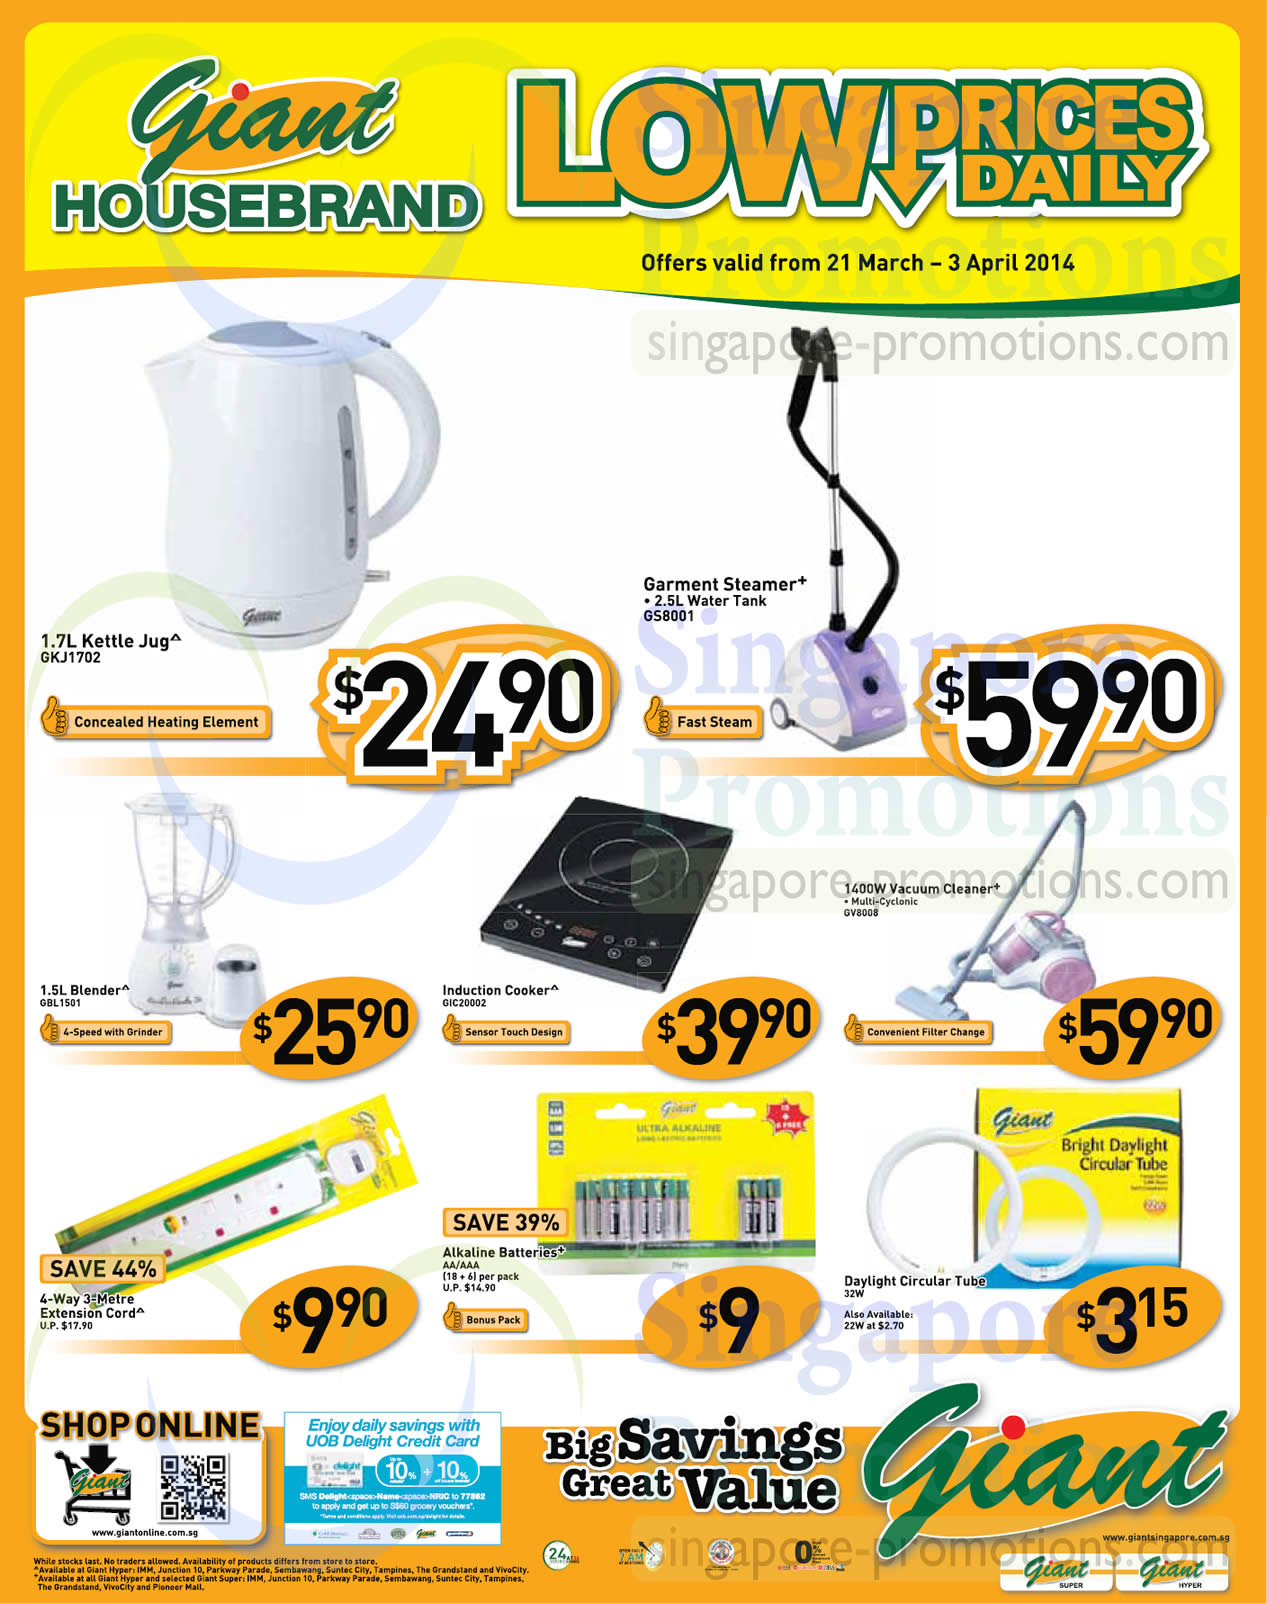 Featured image for Giant Hypermarket $88 Cooling Appliances, Baby, Groceries & Backpacks Offers 21 Mar - 3 Apr 2014